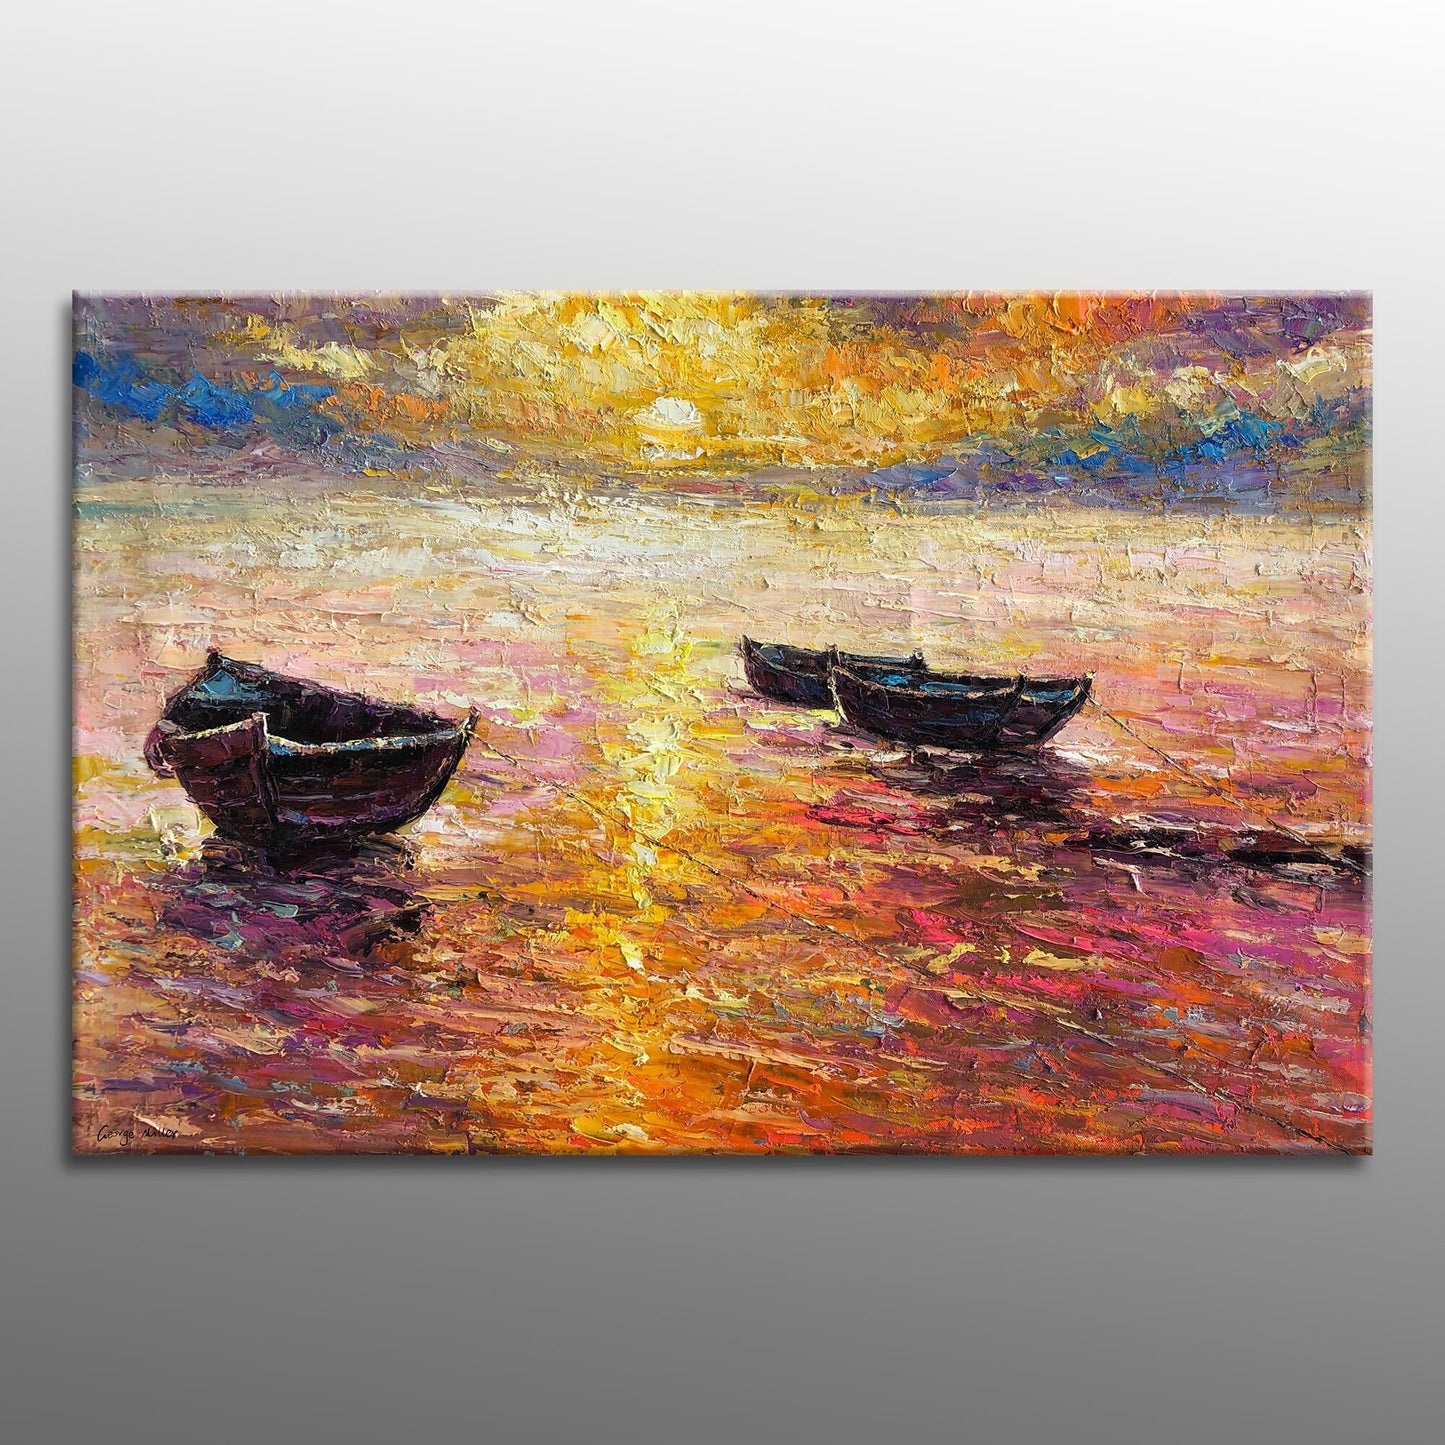 Fishing Boat at Dawn: Large Wall Decor | Original Oil Painting | Seascape Art, Oil Painting Abstract, Living Room Wall Décor